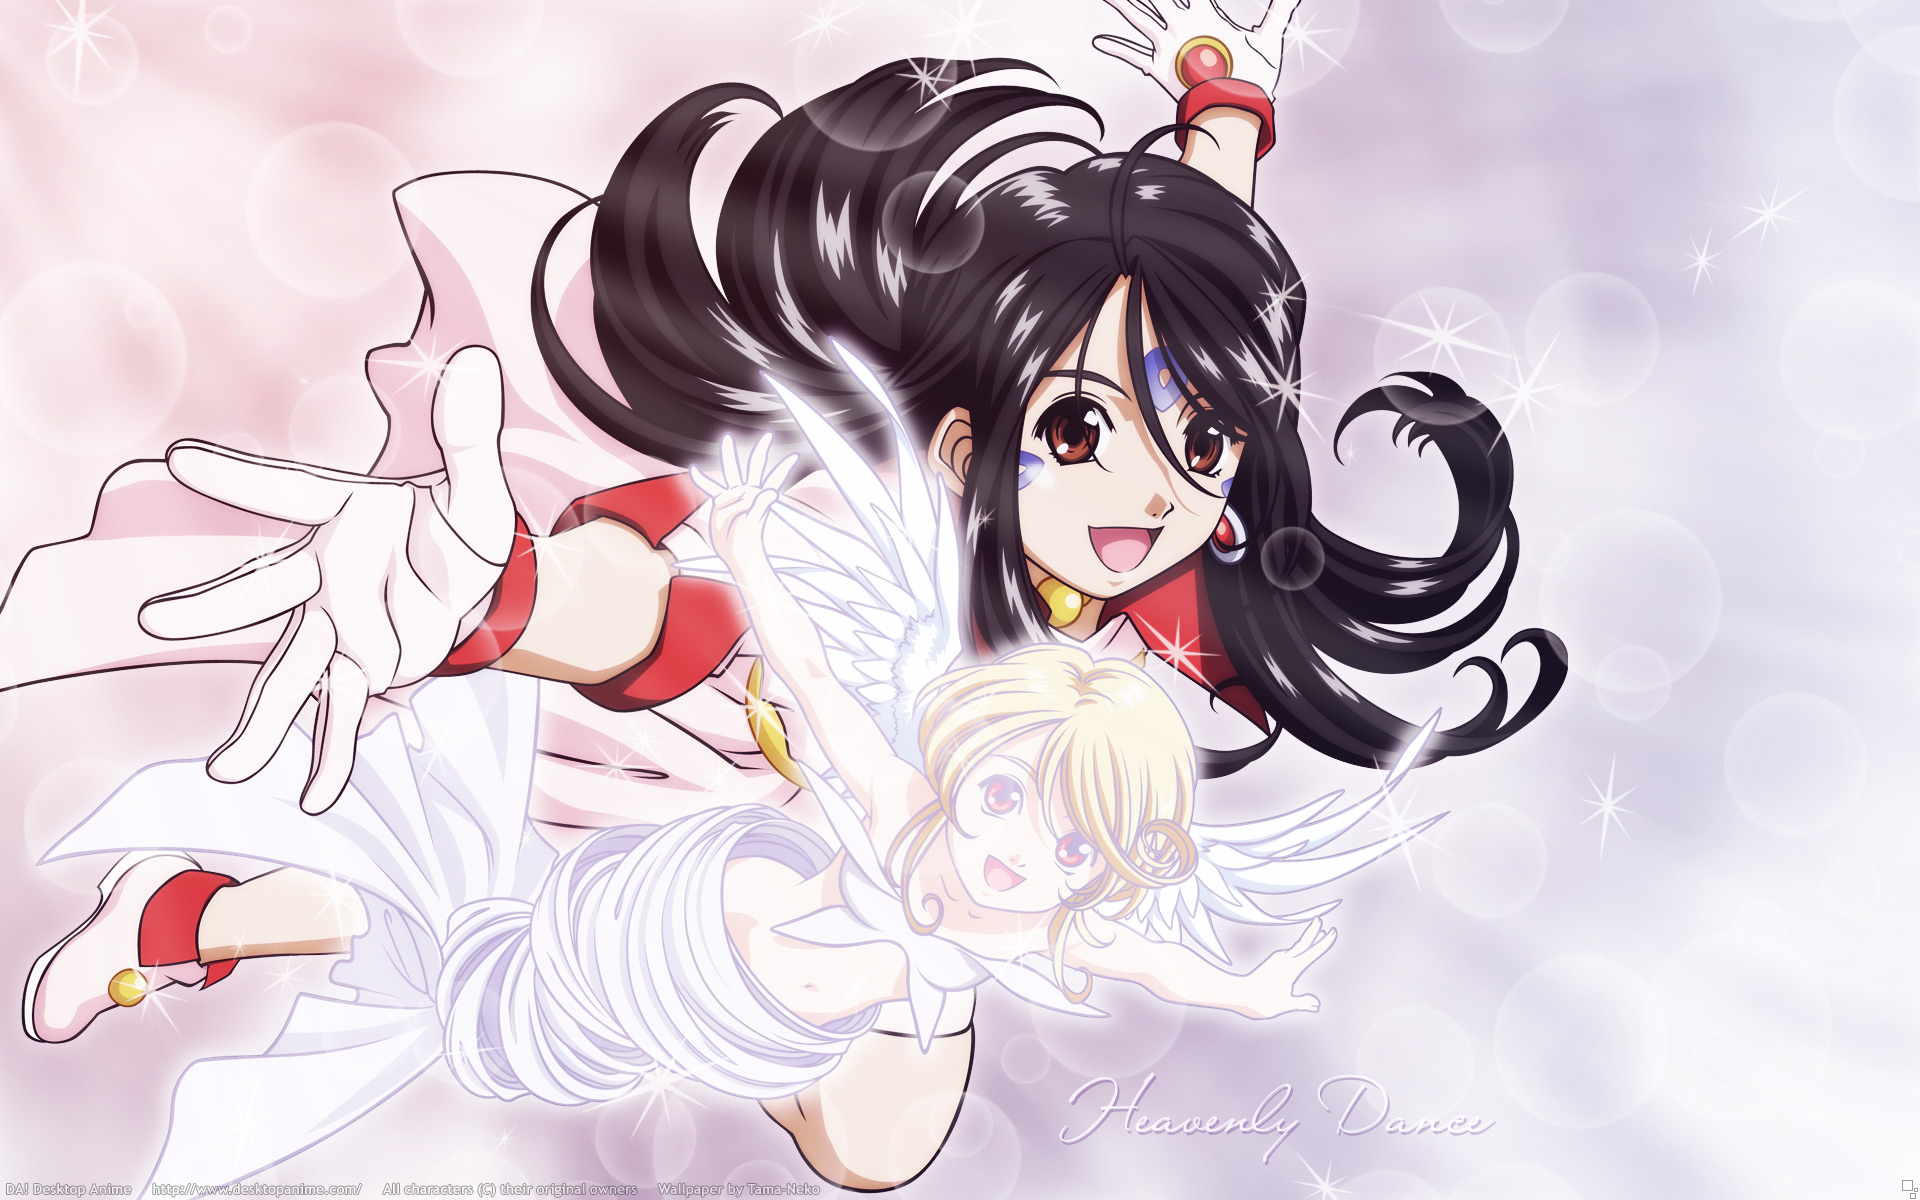 Skuld and Belldandy, angelic goddesses from Ah! My Goddess, featured in anime desktop wallpaper.